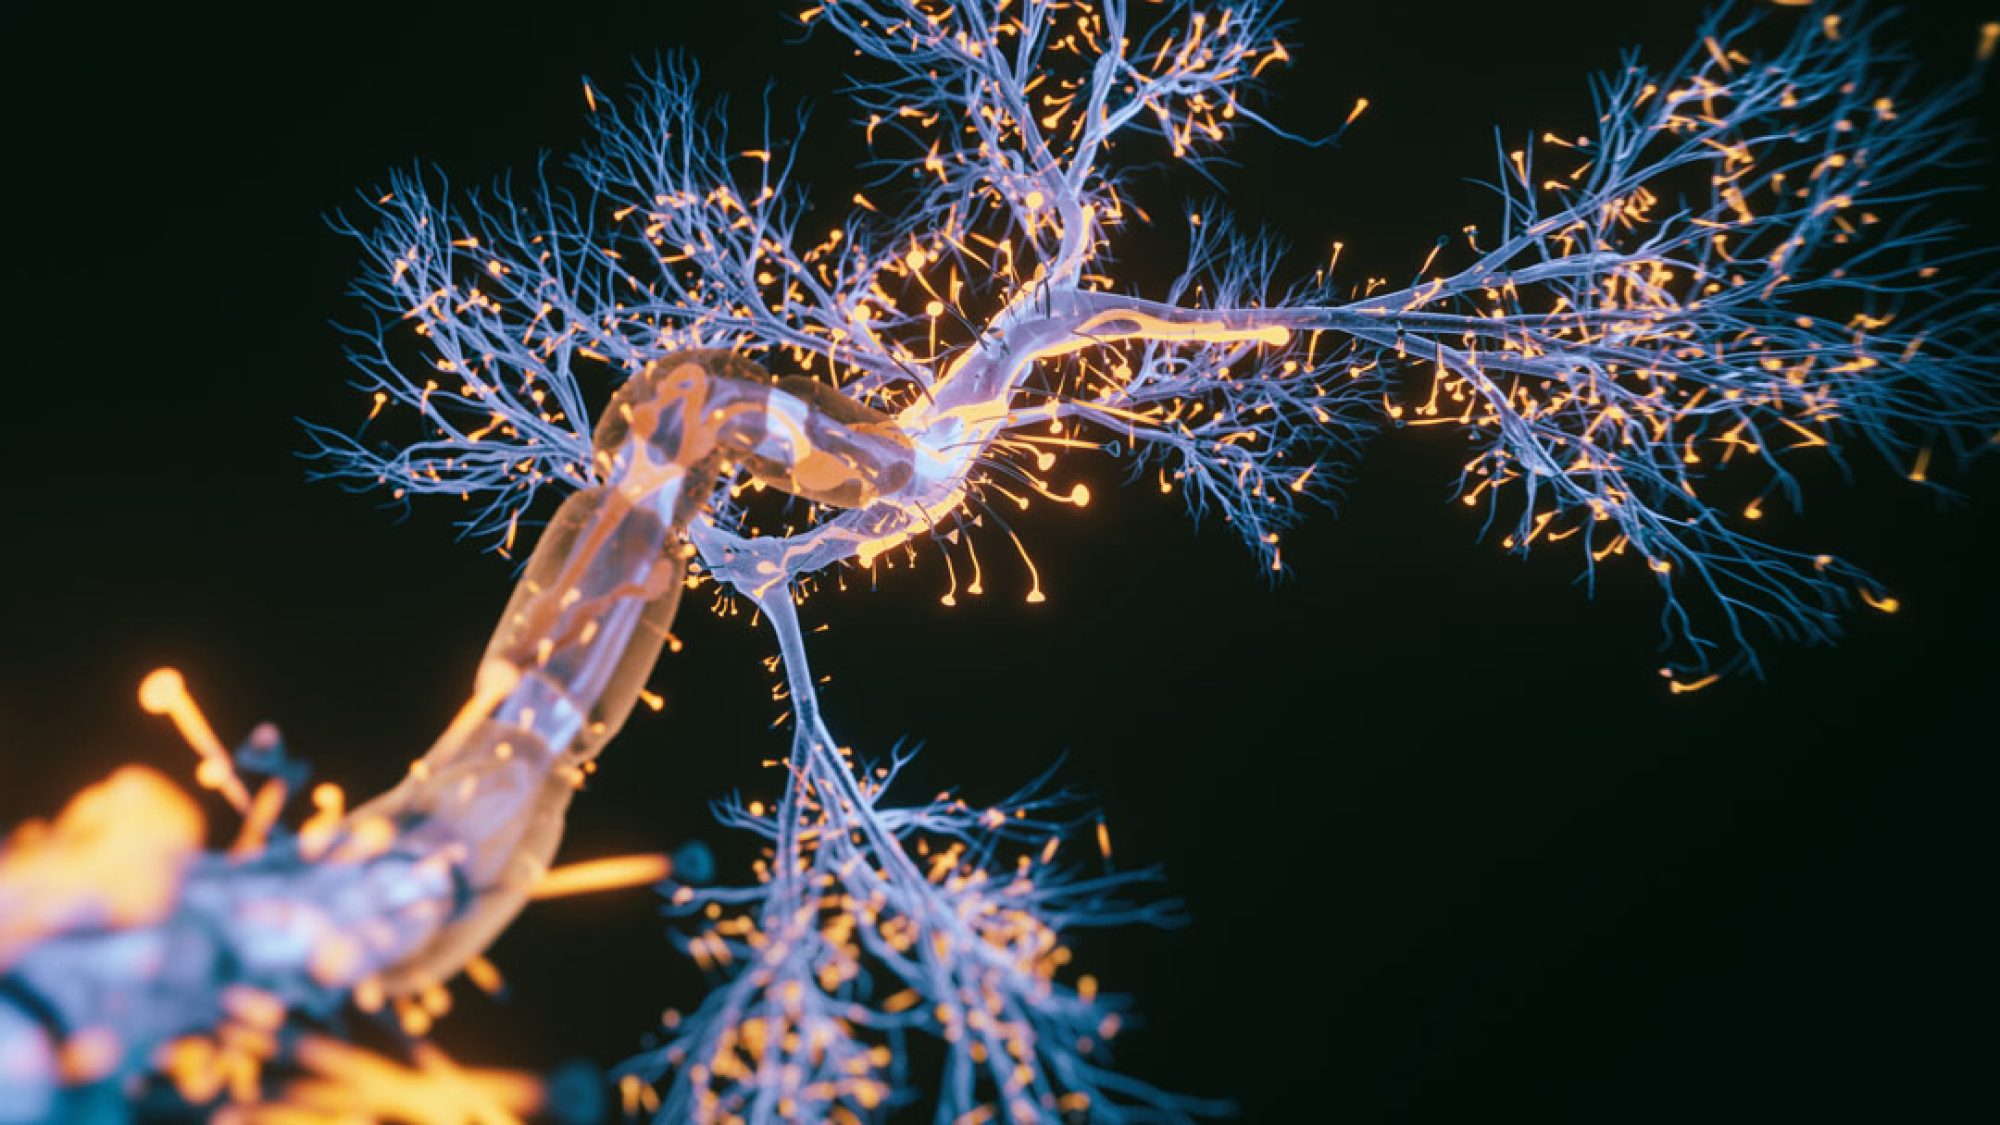 Neurons in the brain, lit up against black background.